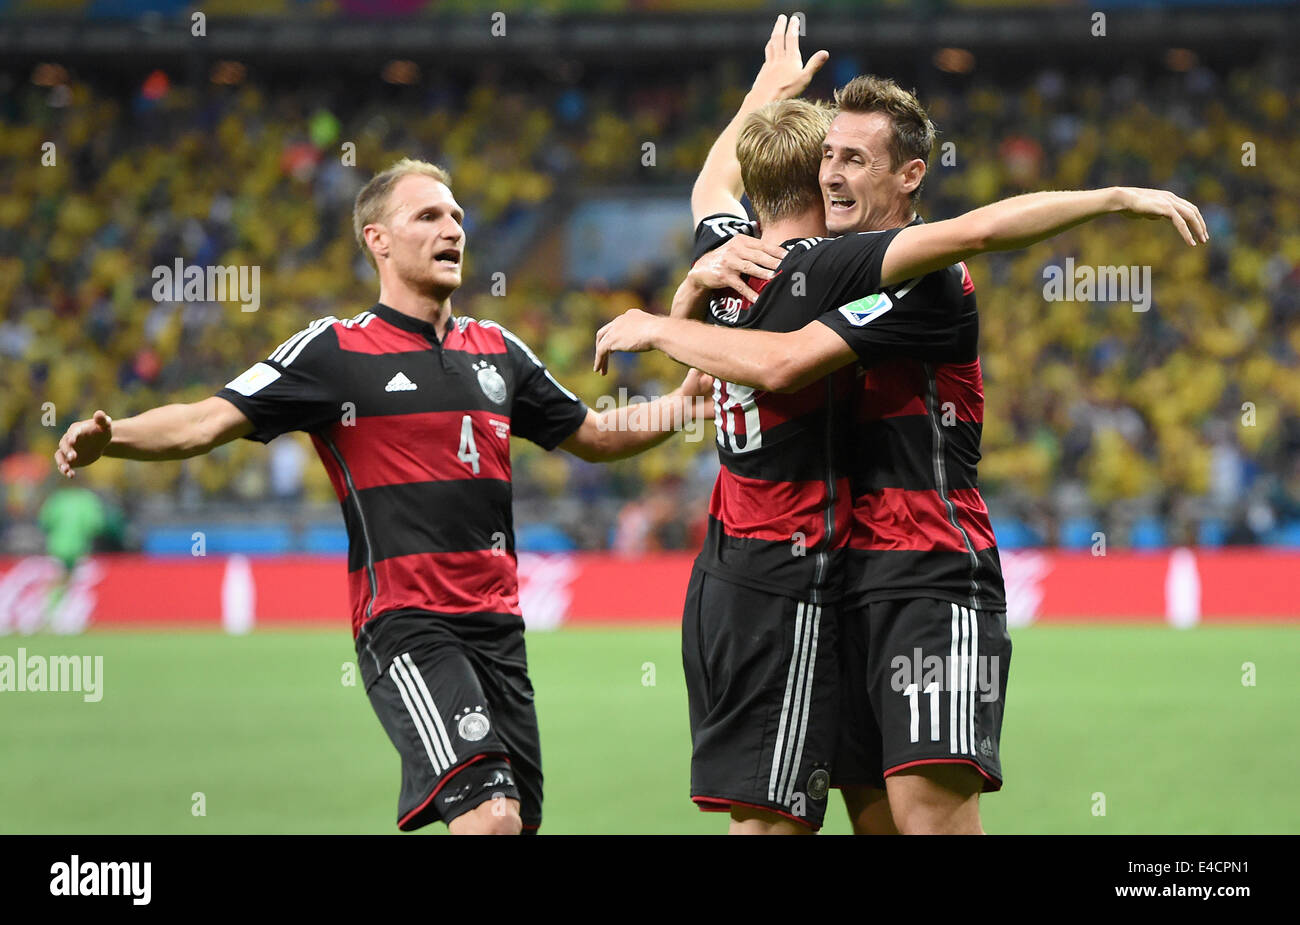 Belo Horizonte, Brazil. 08th July, 2014. Toni Kroos (C) of Germany celebrates with his teammmates Miroslav Klose (R) and Benedikt Hoewedes (L) after scoring 0-3 goal during the FIFA World Cup 2014 semi-final soccer match between Brazil and Germany at Estadio Mineirao in Belo Horizonte, Brazil, 08 July 2014. Photo: Marcus Brandt/dpa/Alamy Live News Stock Photo